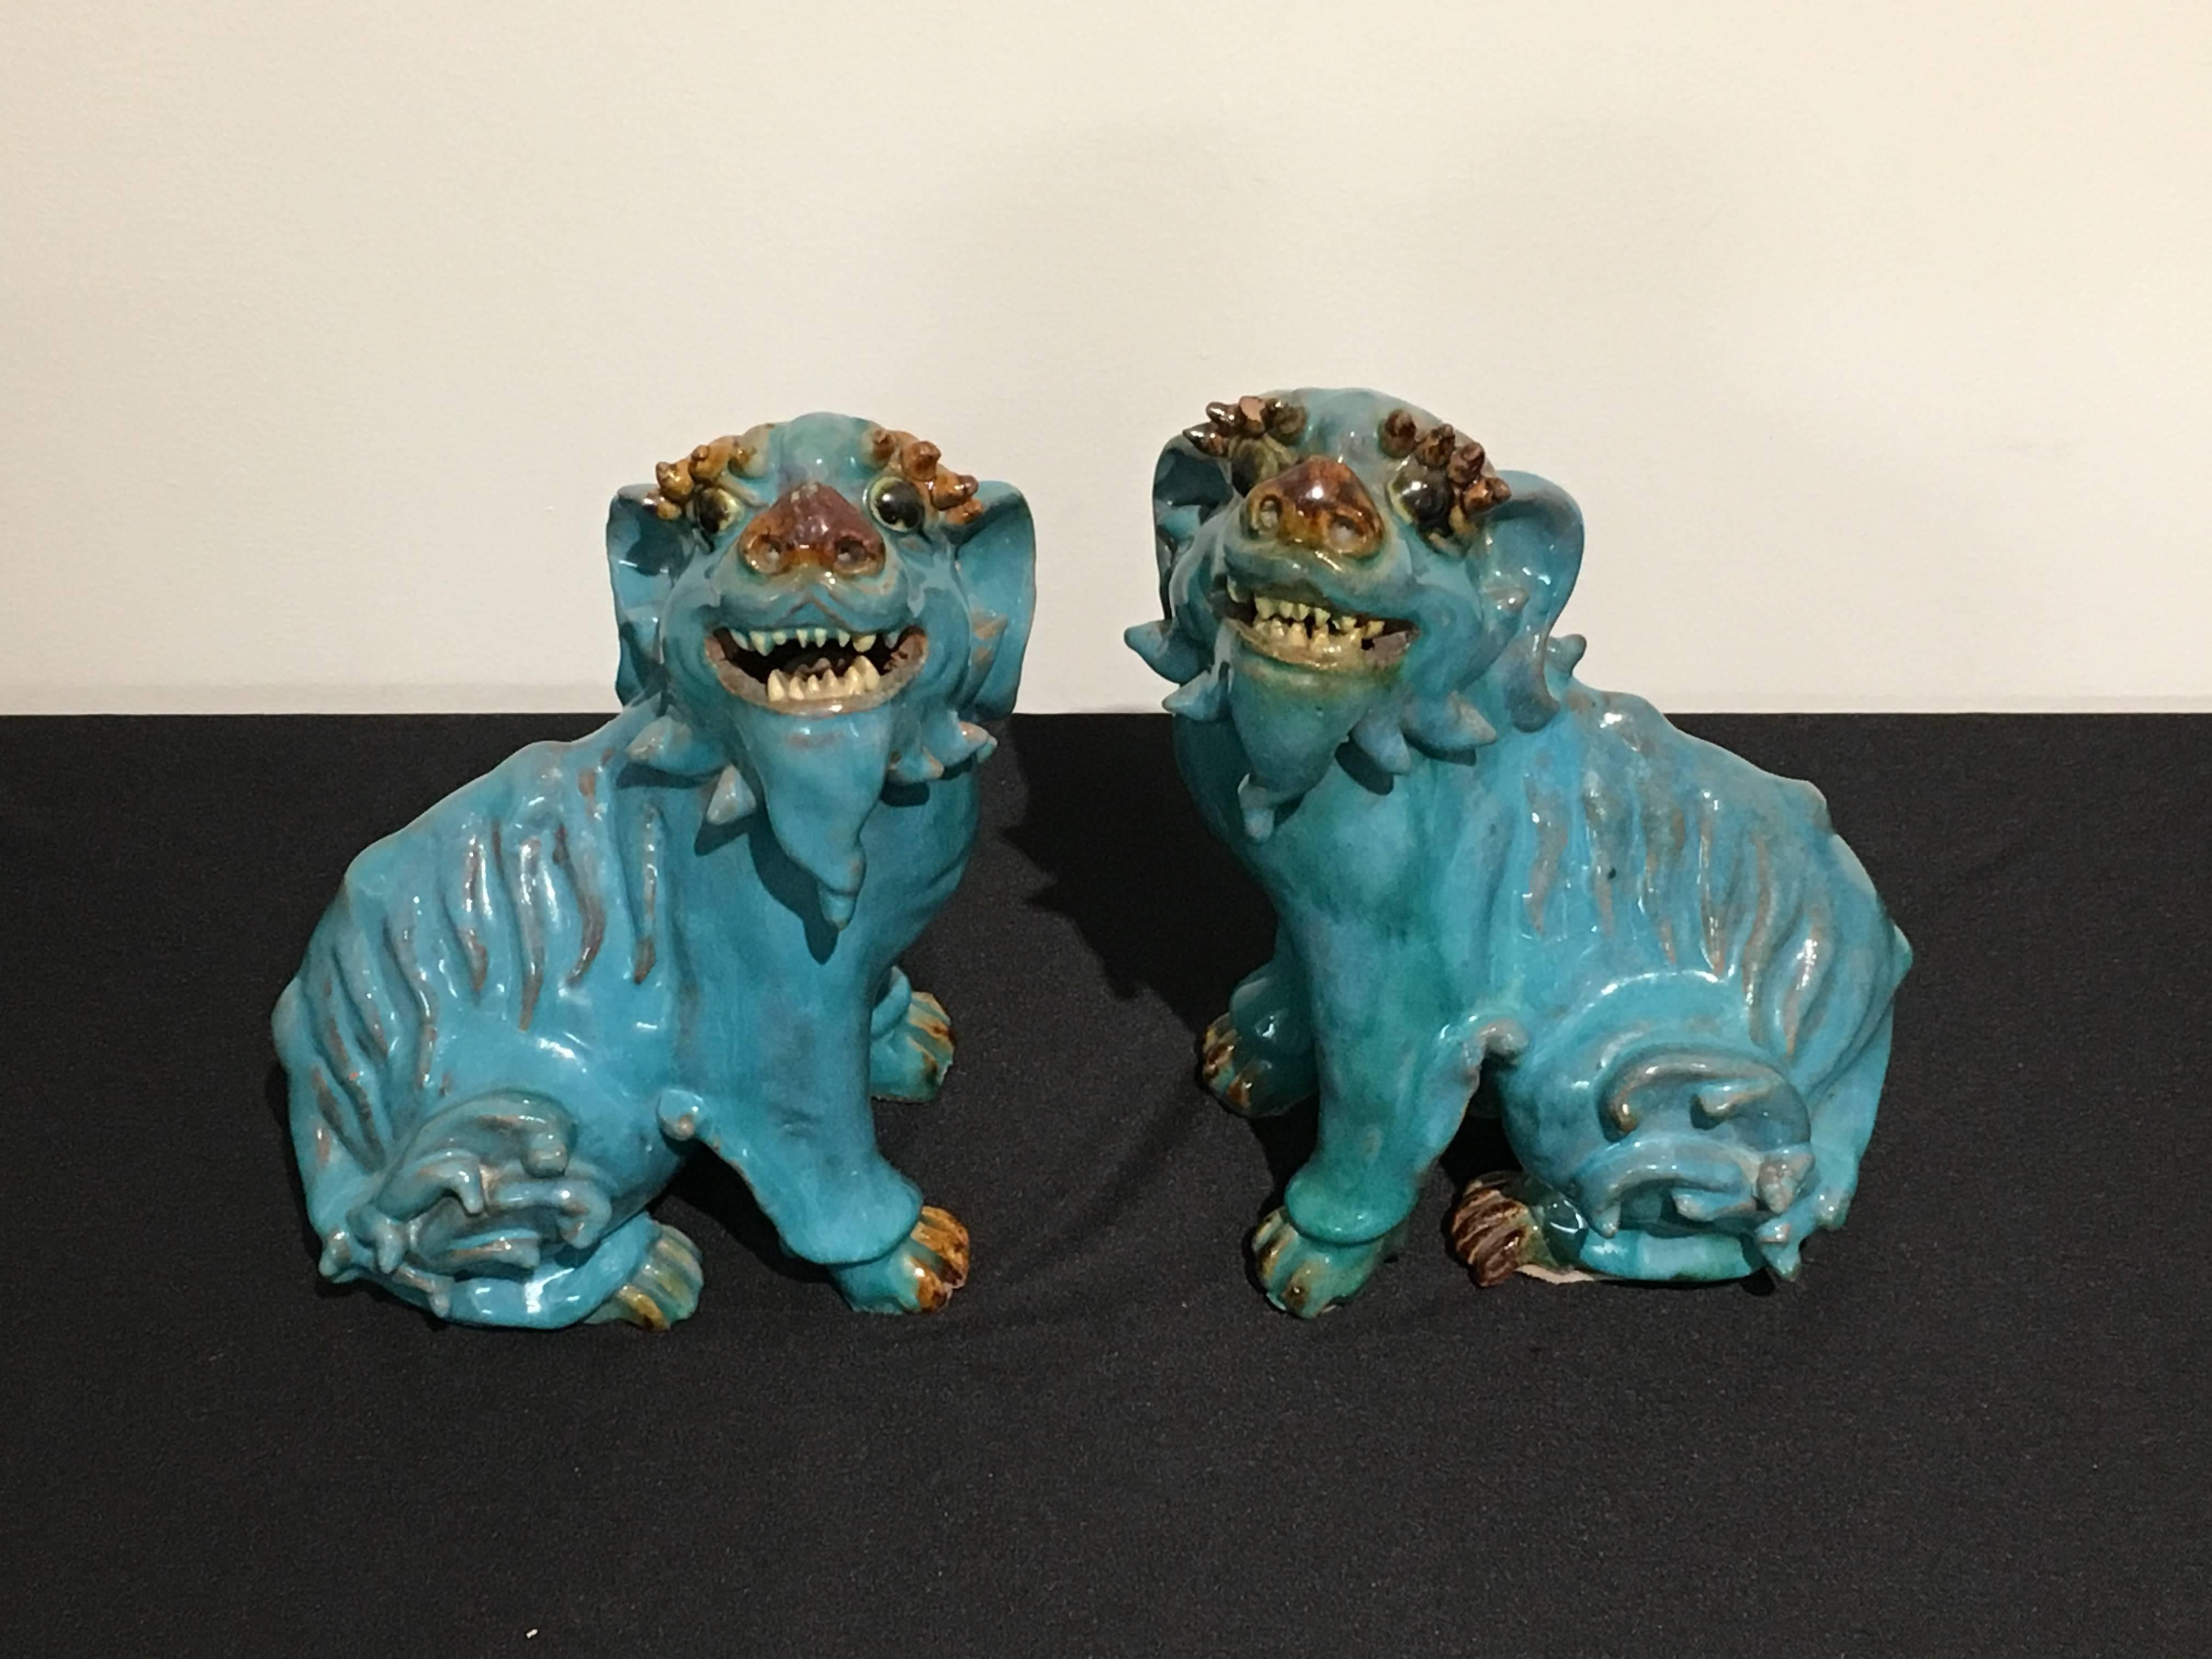 An absolutely delightful pair of Chinese turquoise glazed foo dogs, made for the export market.
Portrayed seated on their haunches, heads raised, mouths in a wide grin, as if expecting treats. They have wonderful molded eyelashes above bulging